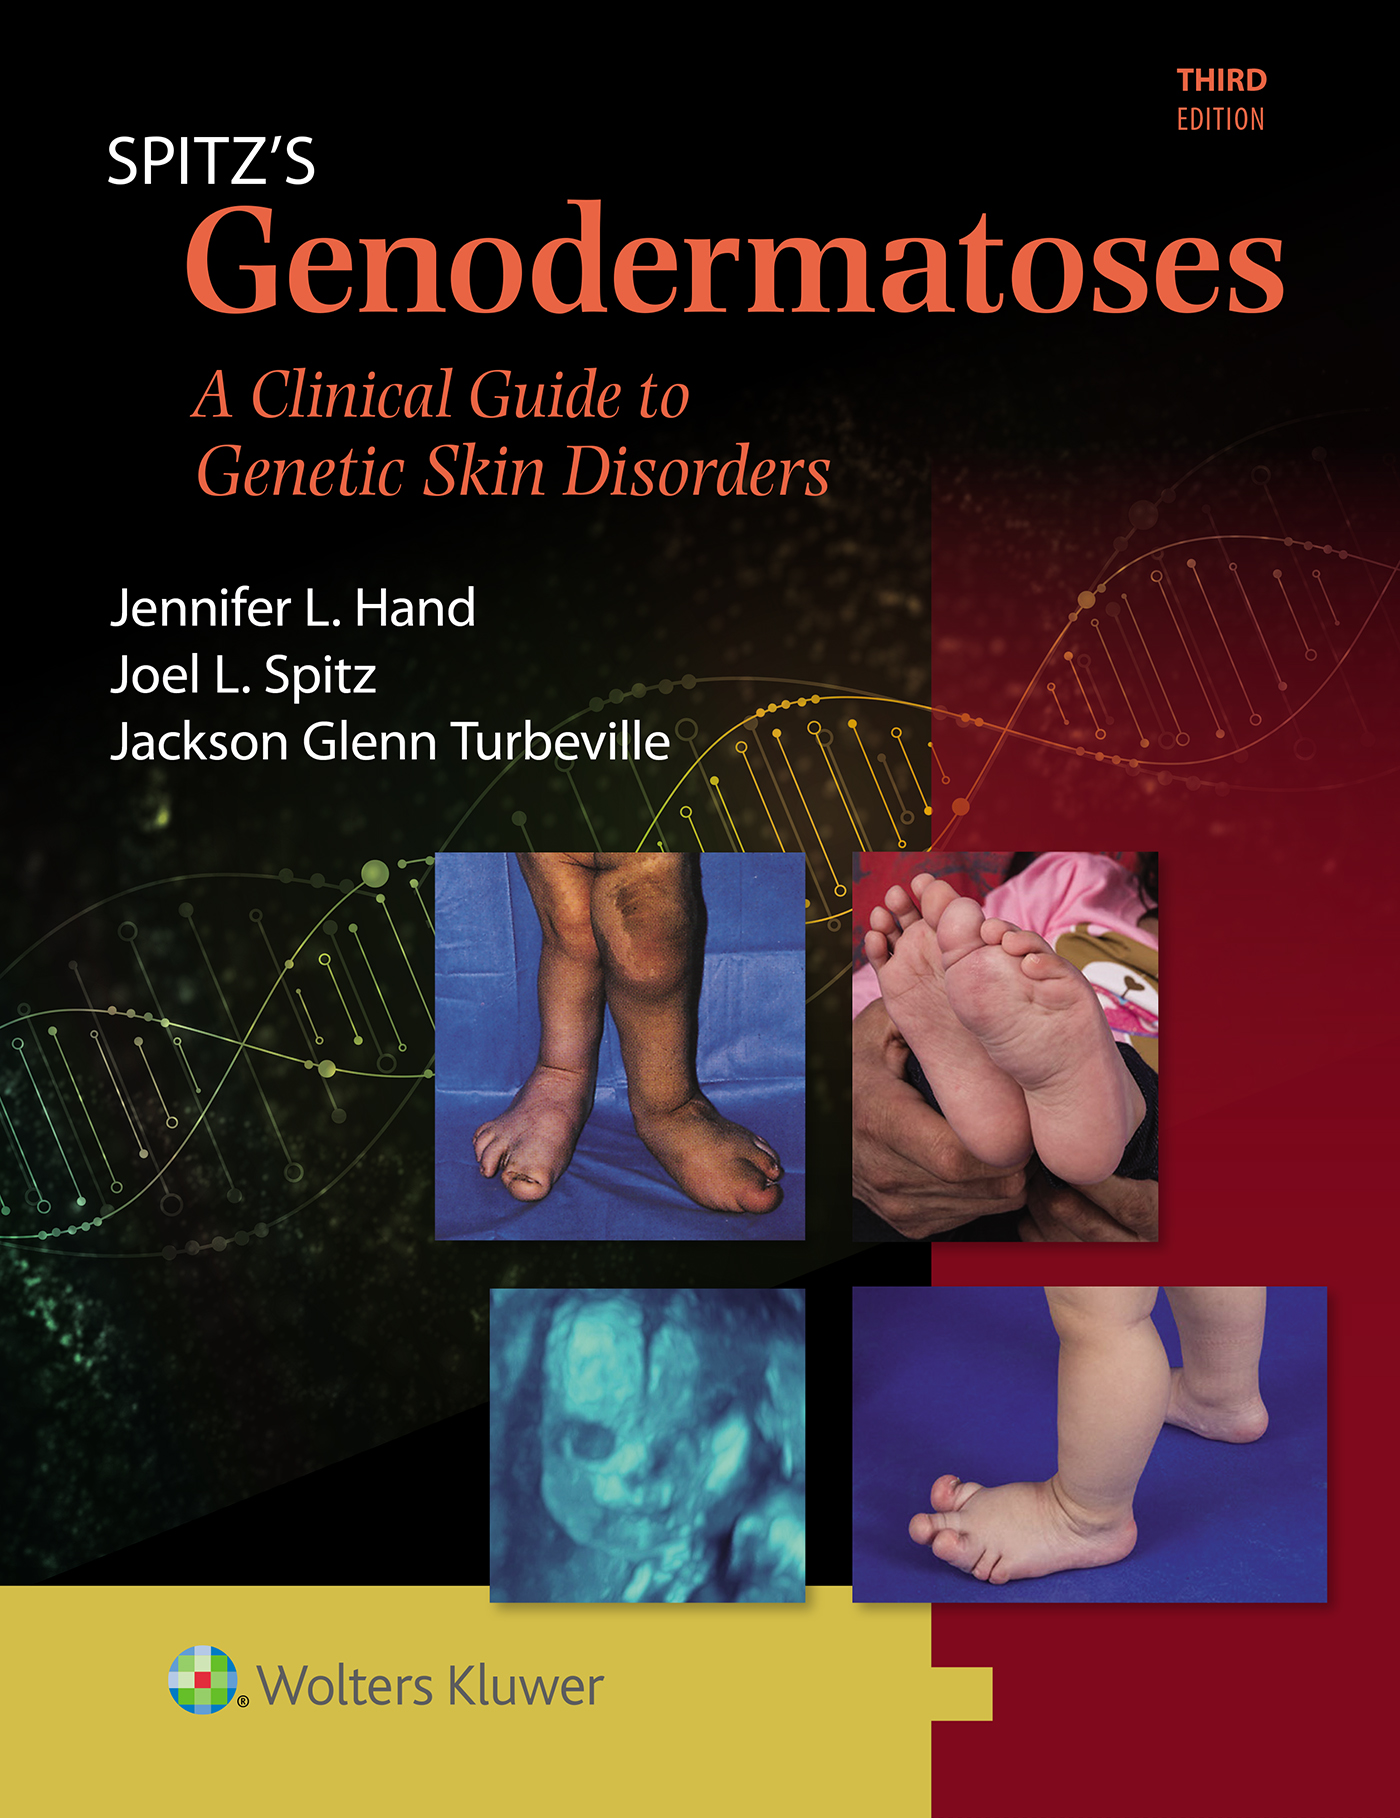 Spitz's Genodermatoses, 3rd ed.- A Clinical Guide to Genetic Skin Disorders